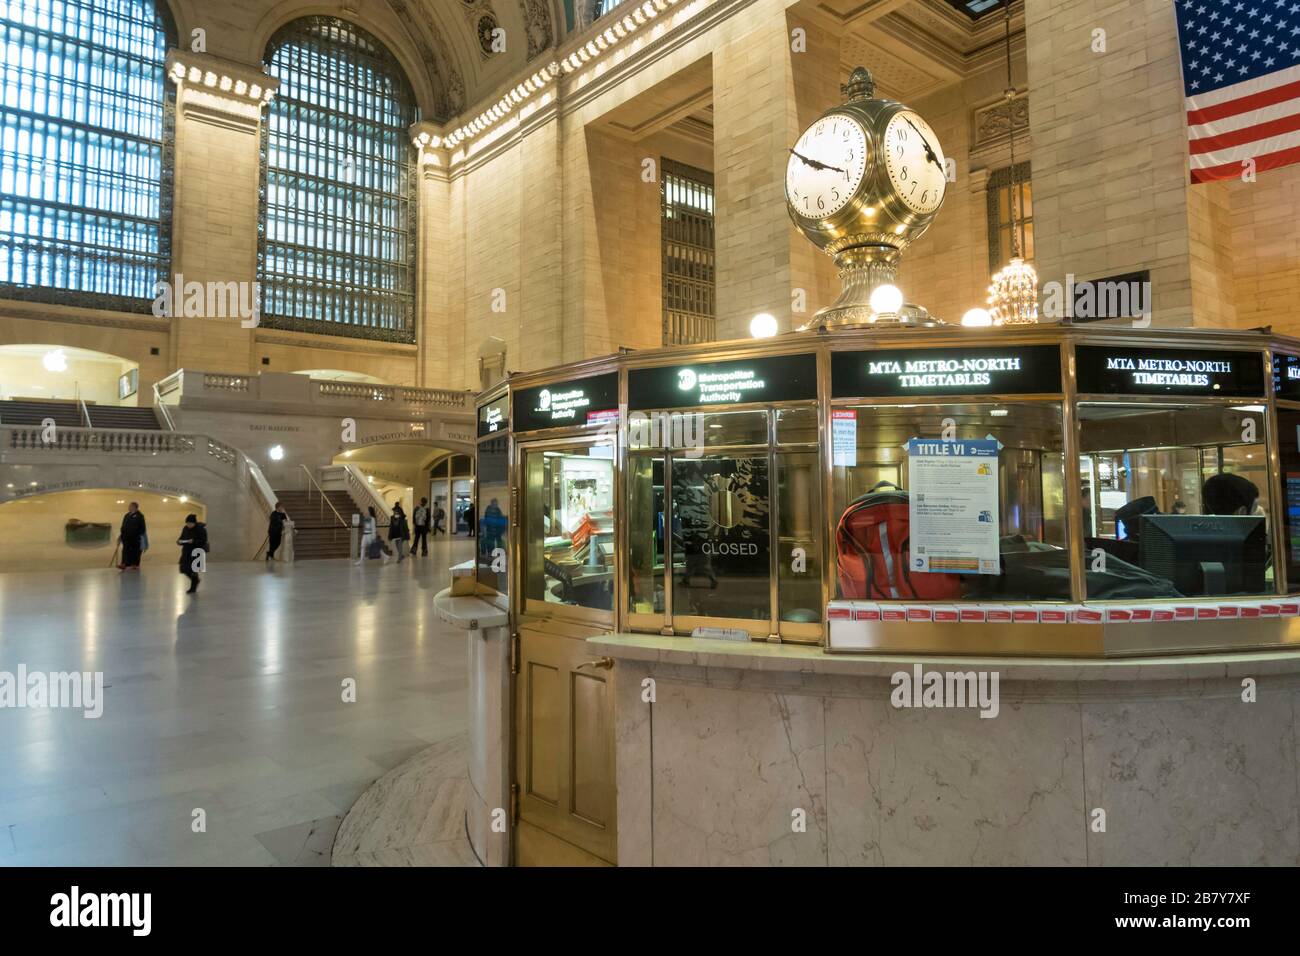 Grand Central is almost empty due to the COVID-19 pandemic, March 2020, New York City, USA Stock Photo